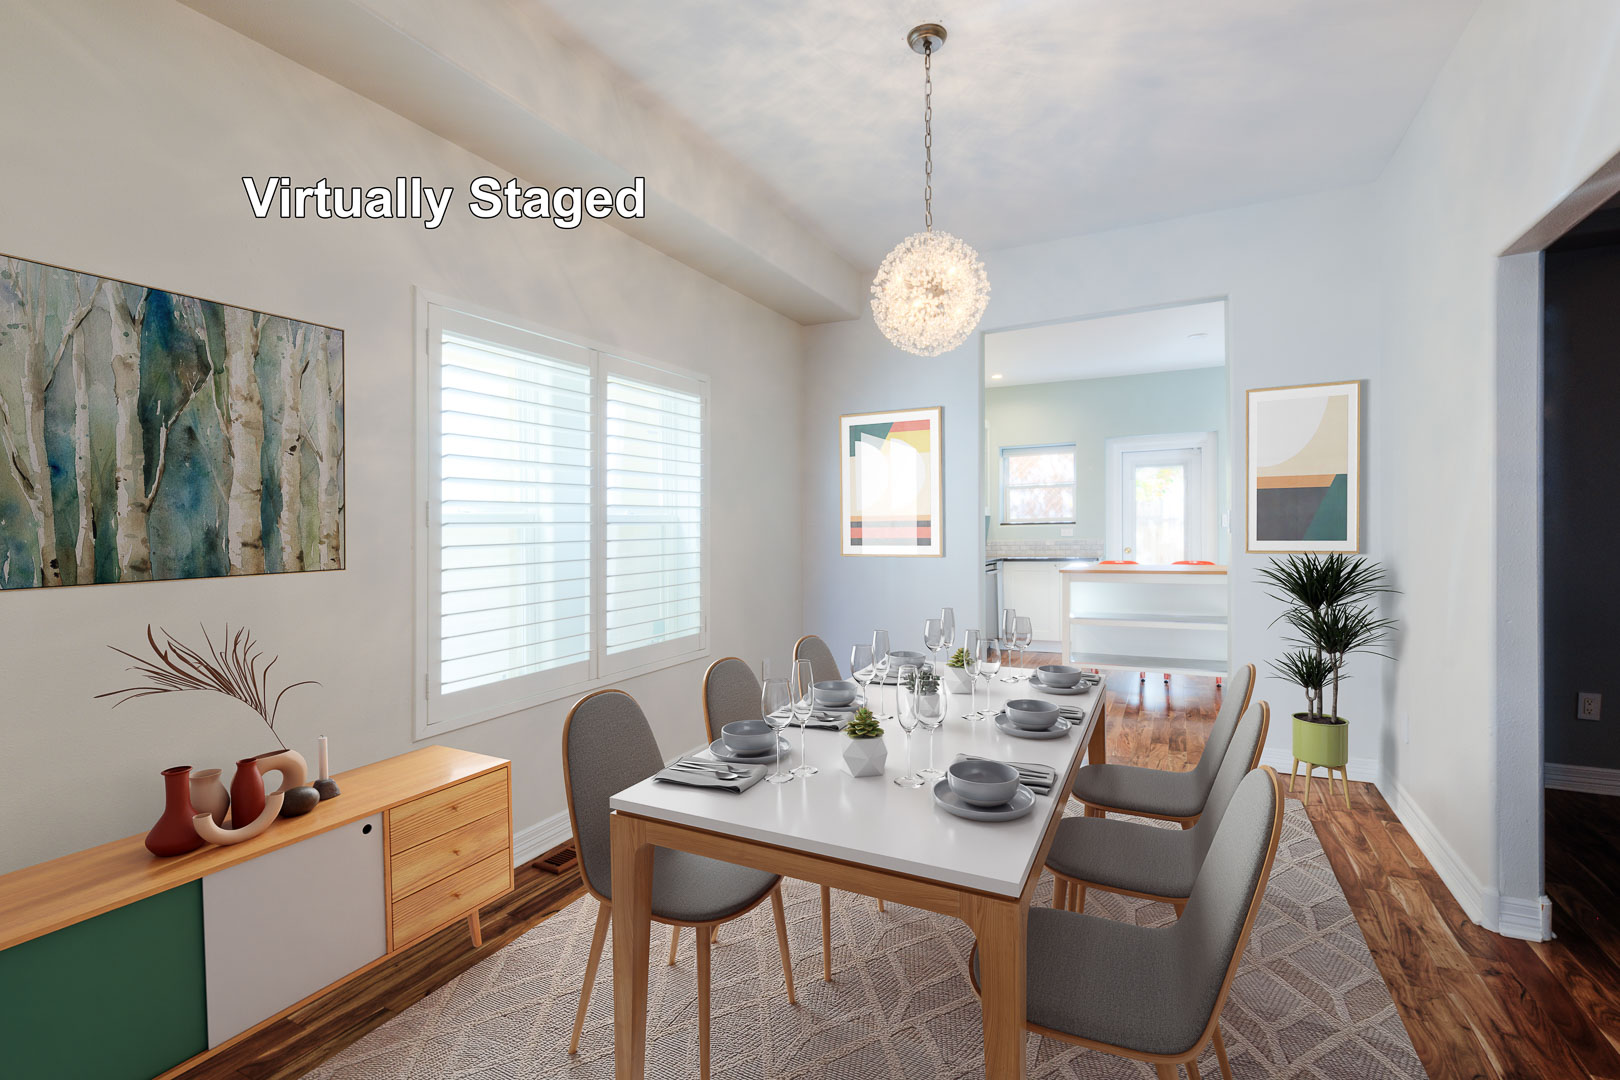 06a 0924 01a Dining Room1 5TMDE RVT3 AD 22 11 23 08 56 Print Web - Virtual Staging